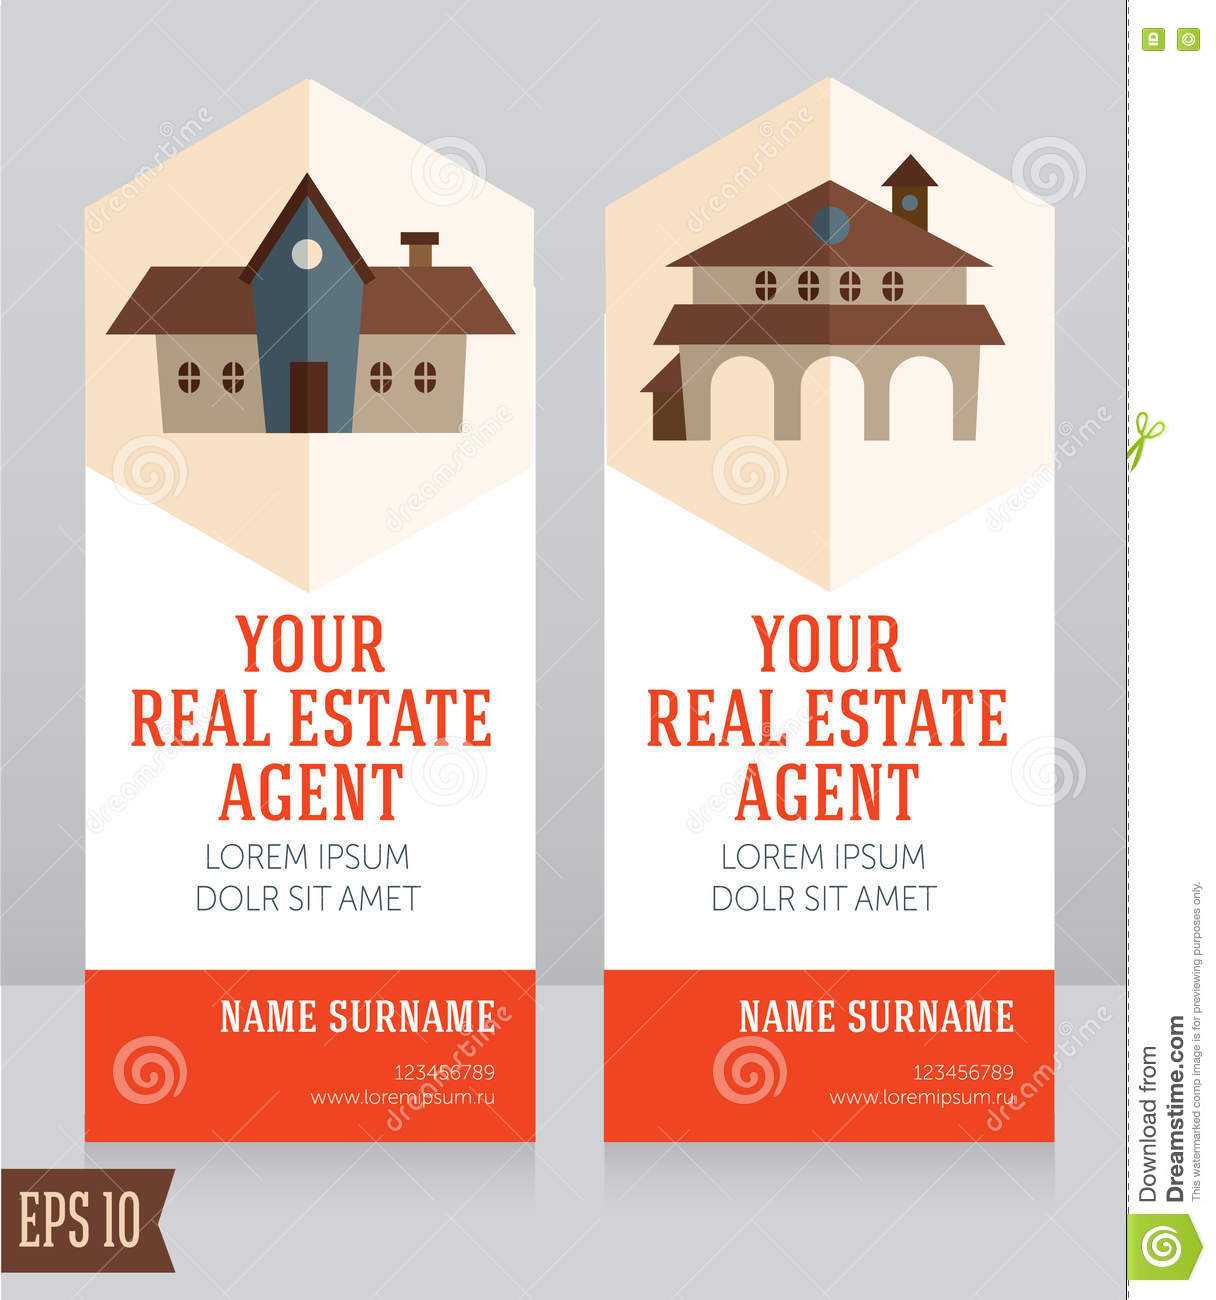 Design Template For Real Estate Agent Business Card Stock Throughout Real Estate Agent Business Card Template